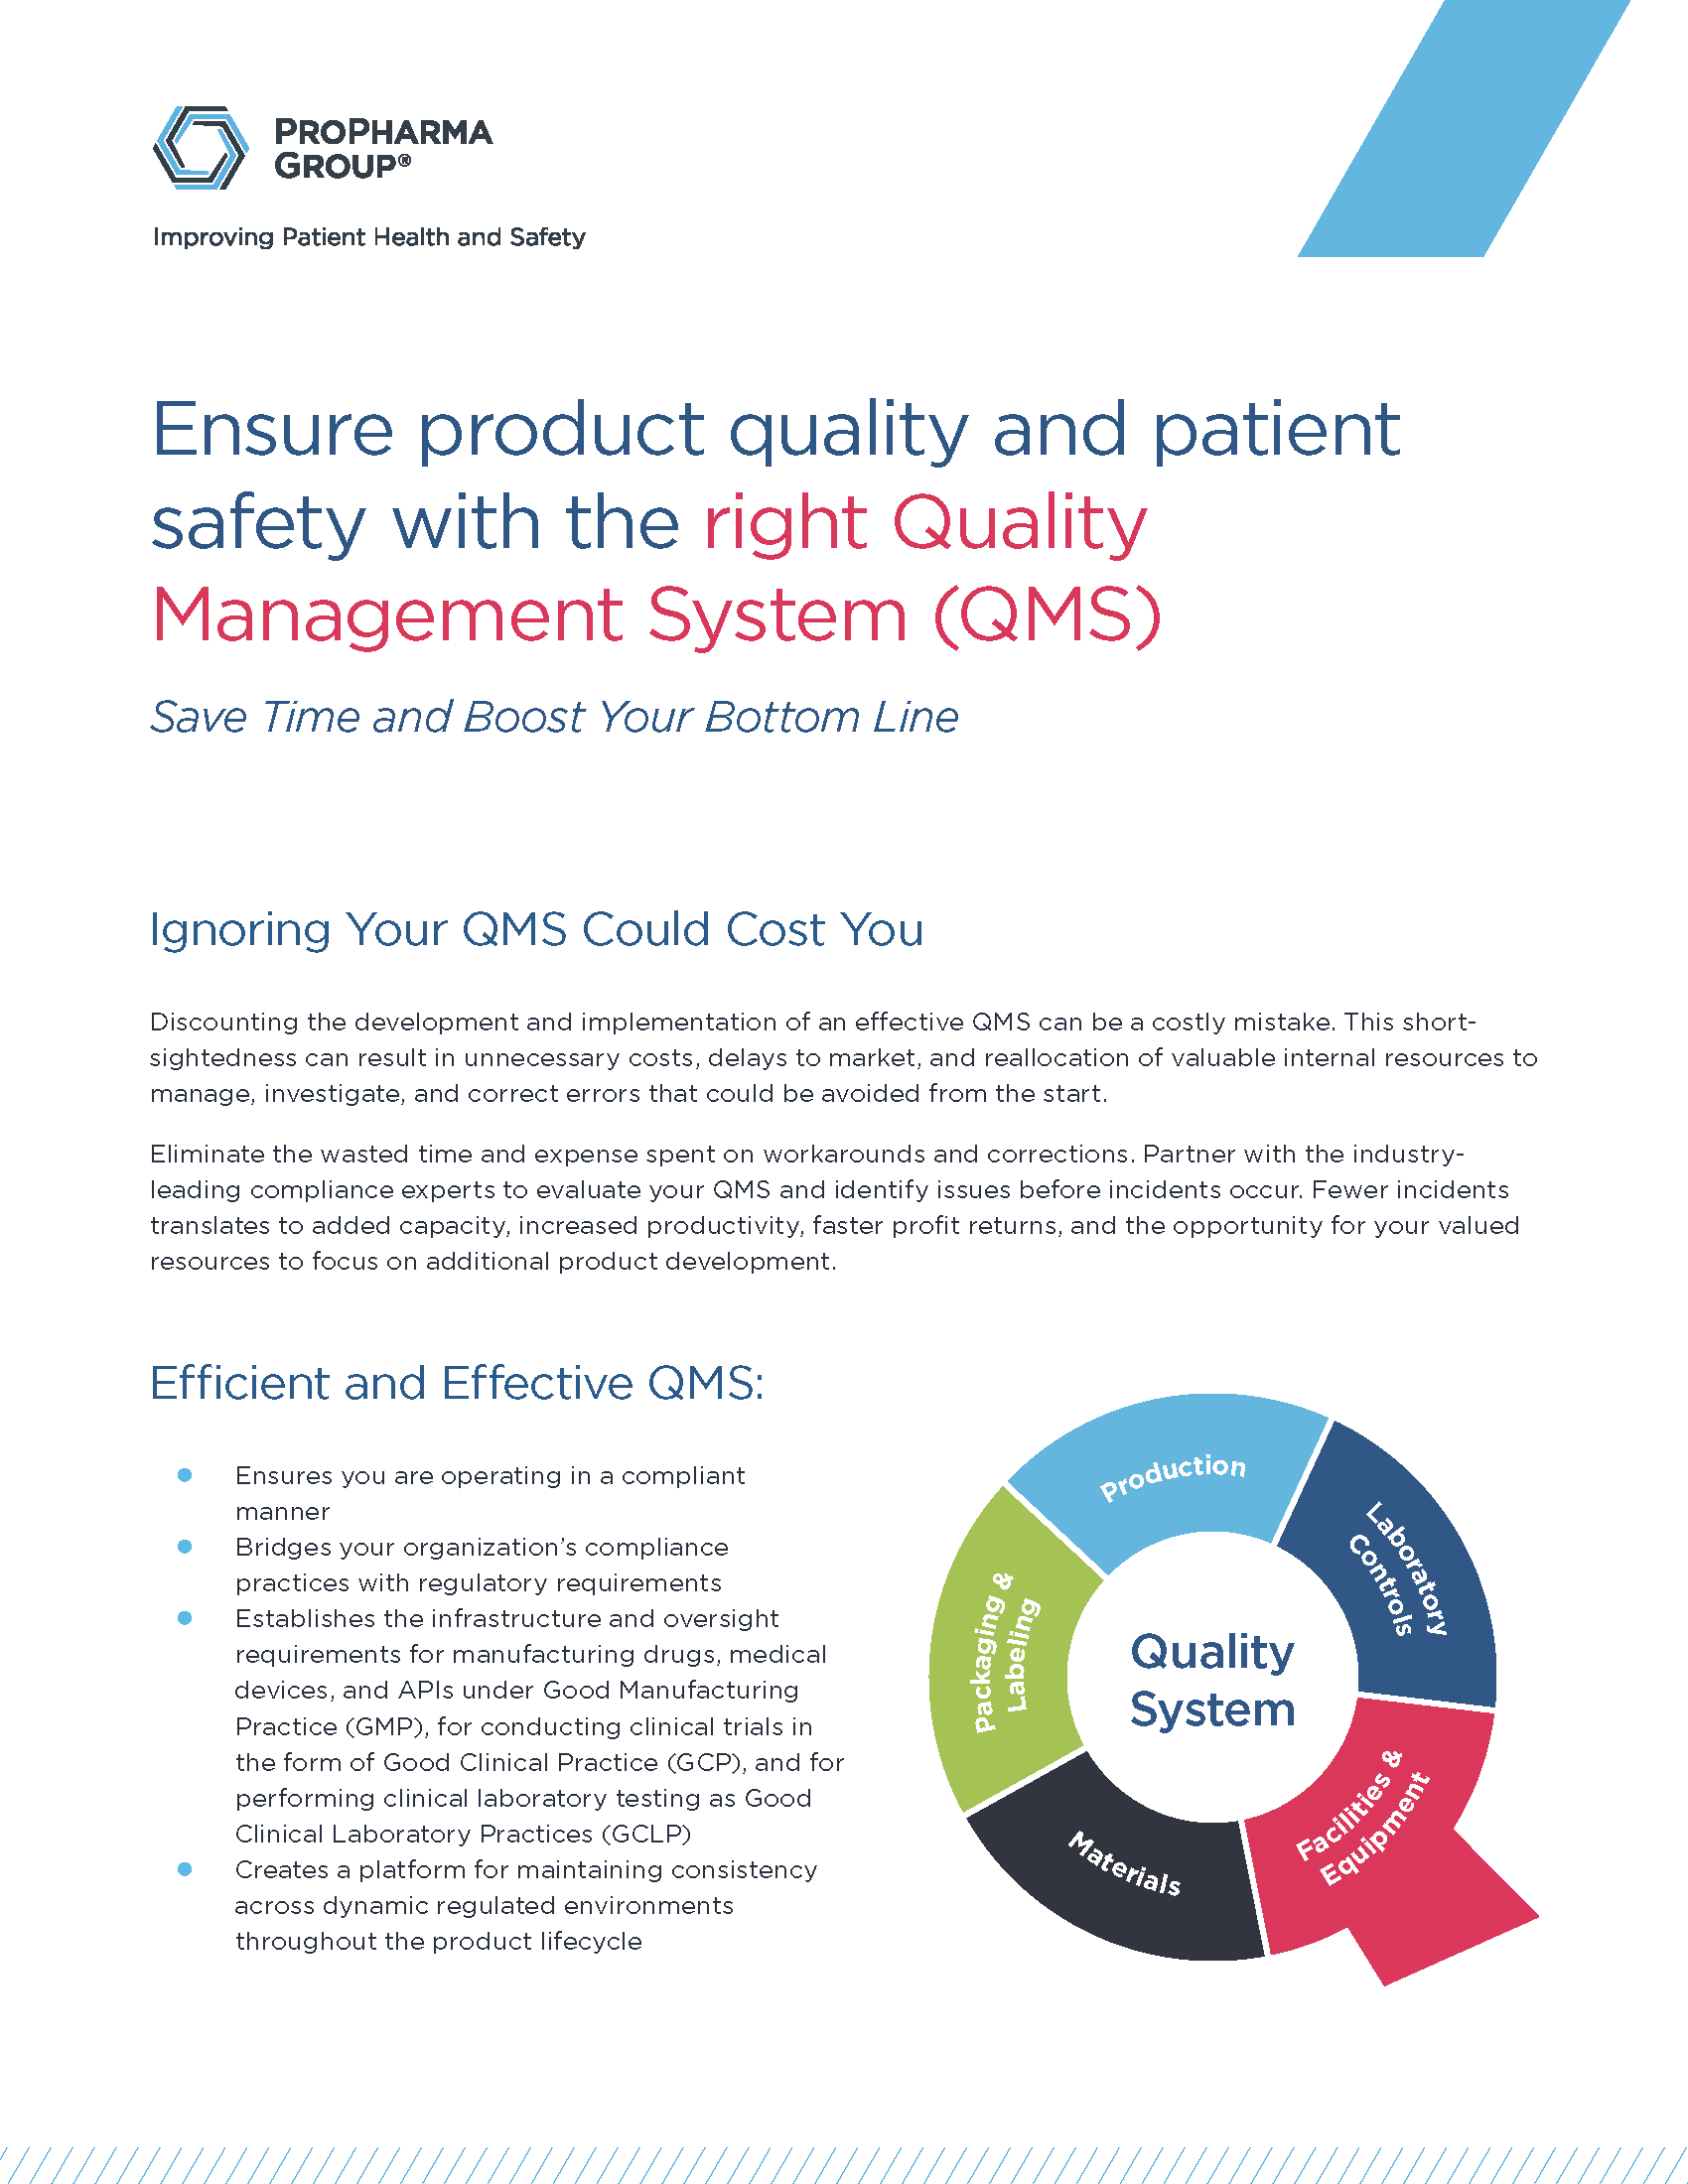 Ensure Product Quality and Patient Safety With the Right Quality Management System (QMS) - Flyer